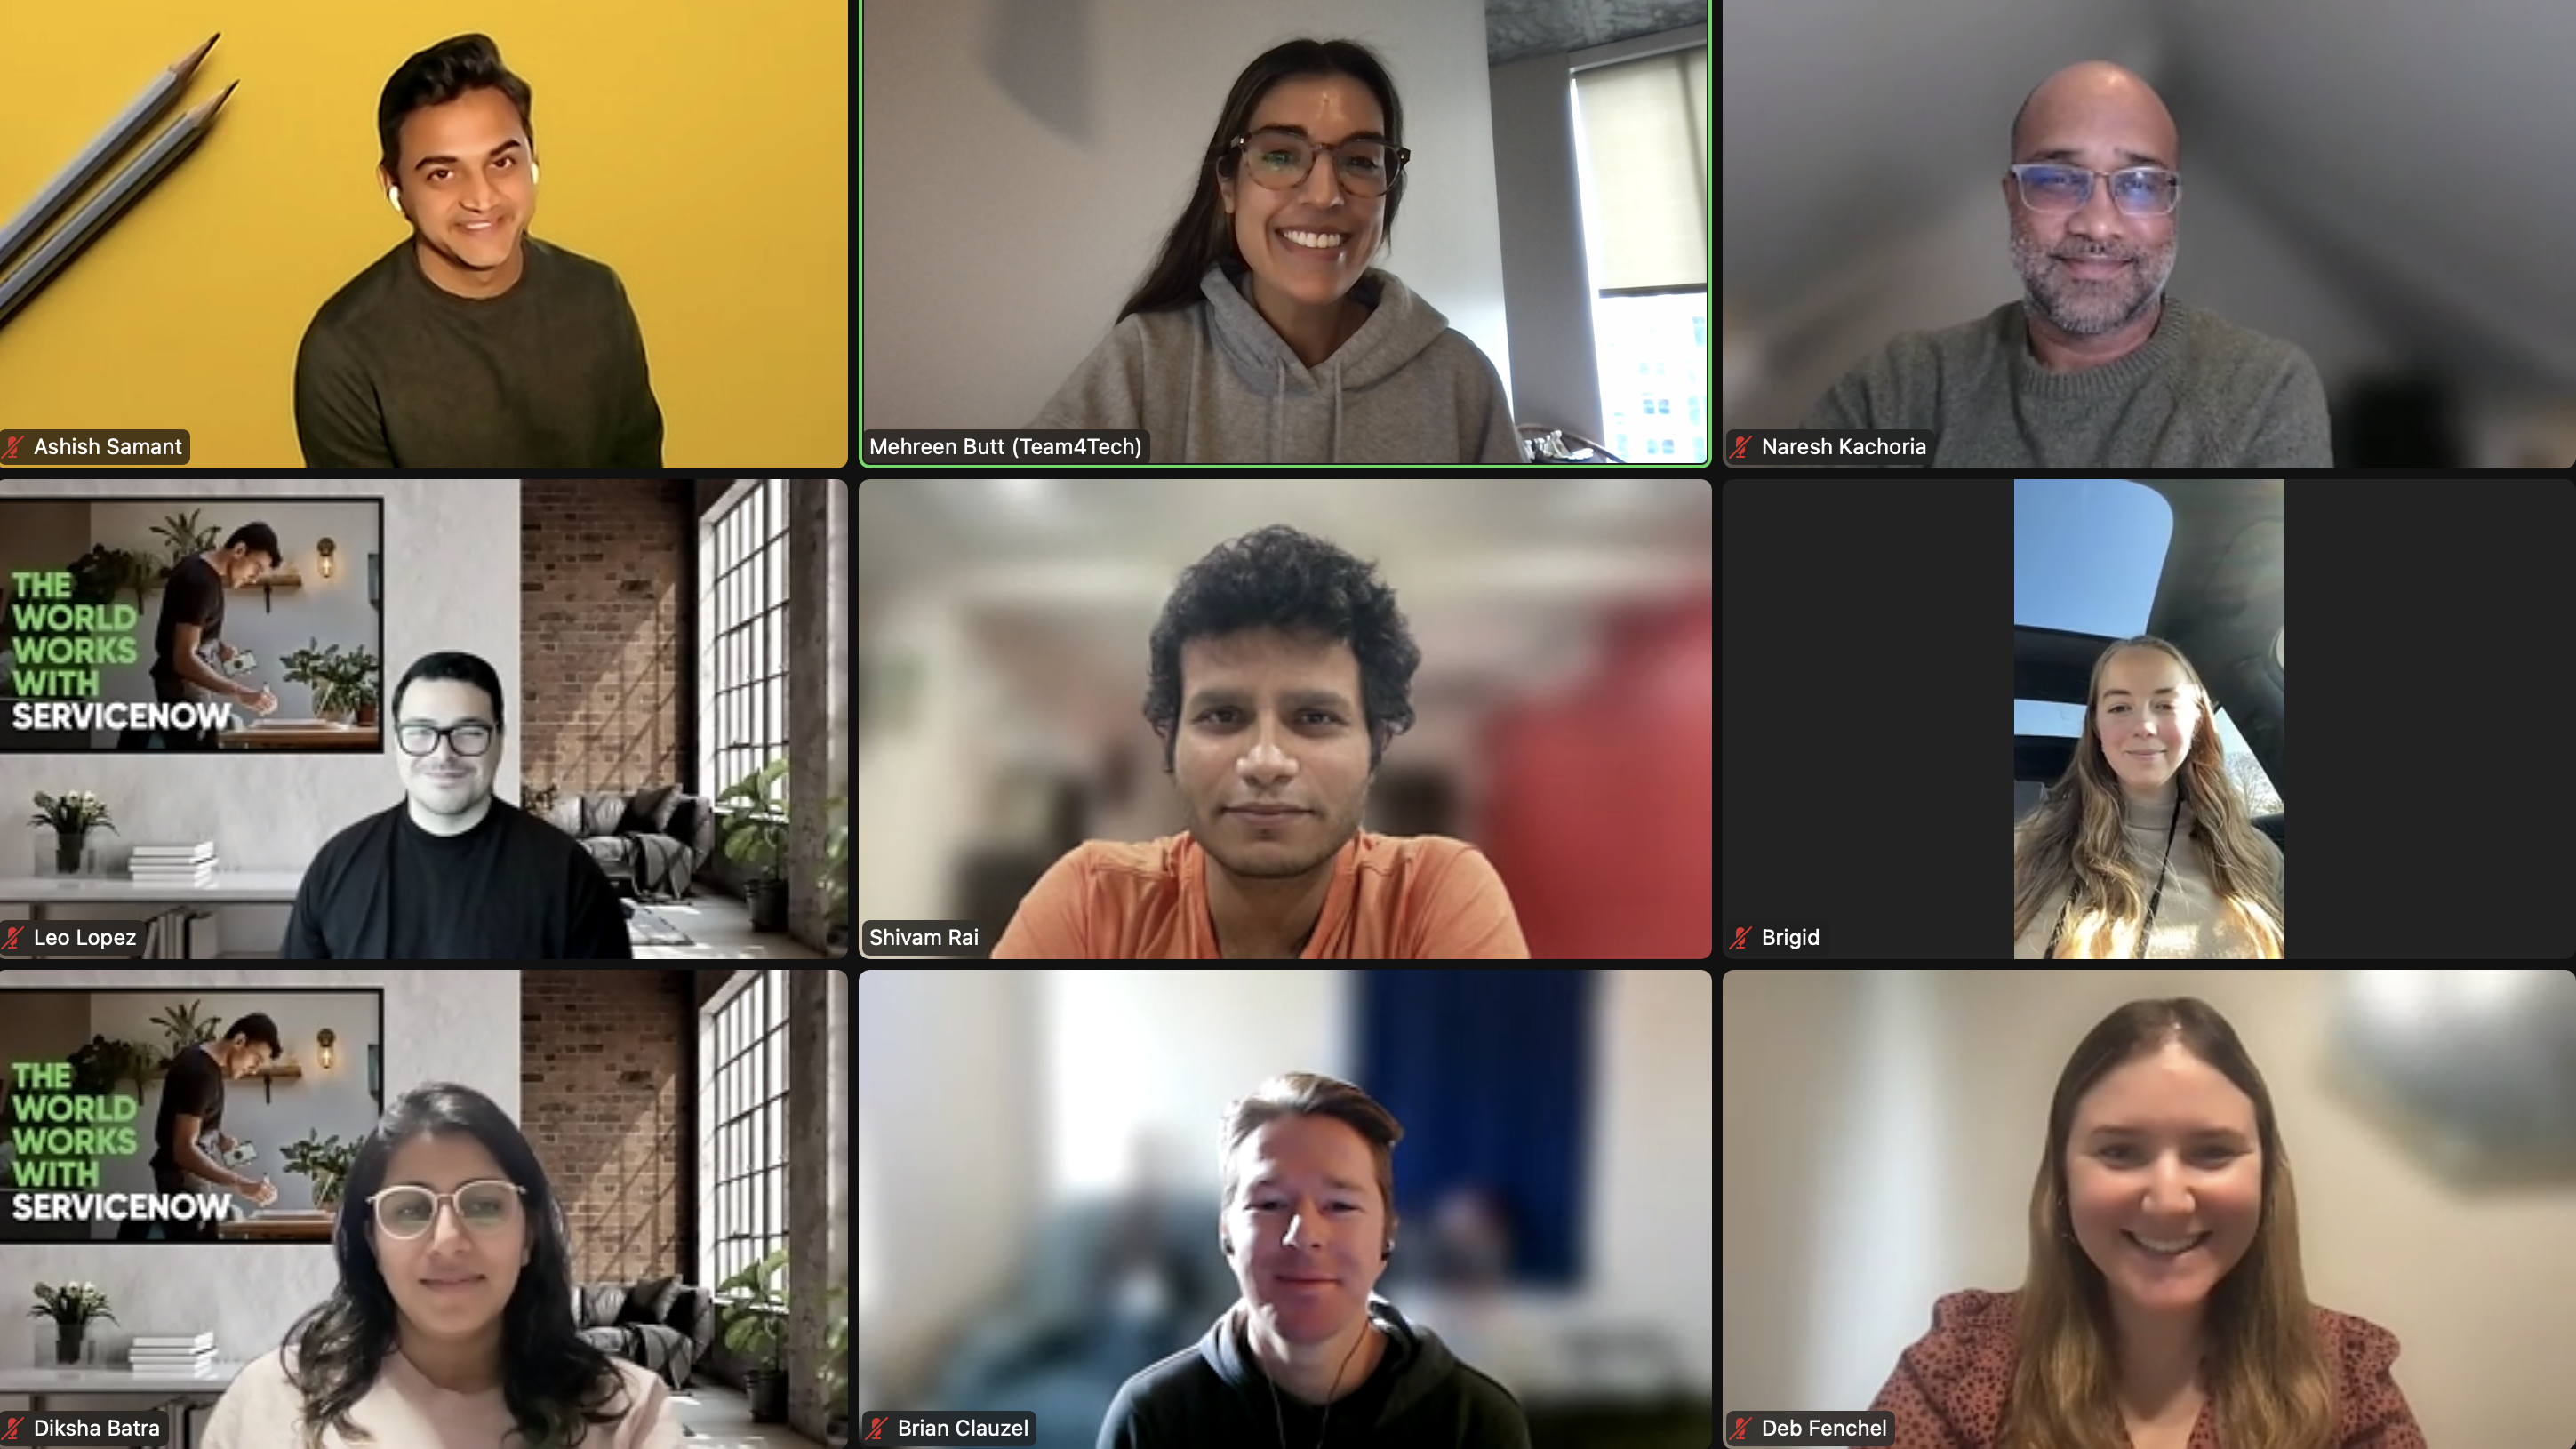 Virtual volunteers smile in online meeting as they helped build organizational capacity to support NGO work on inner development for youth in underserved areas